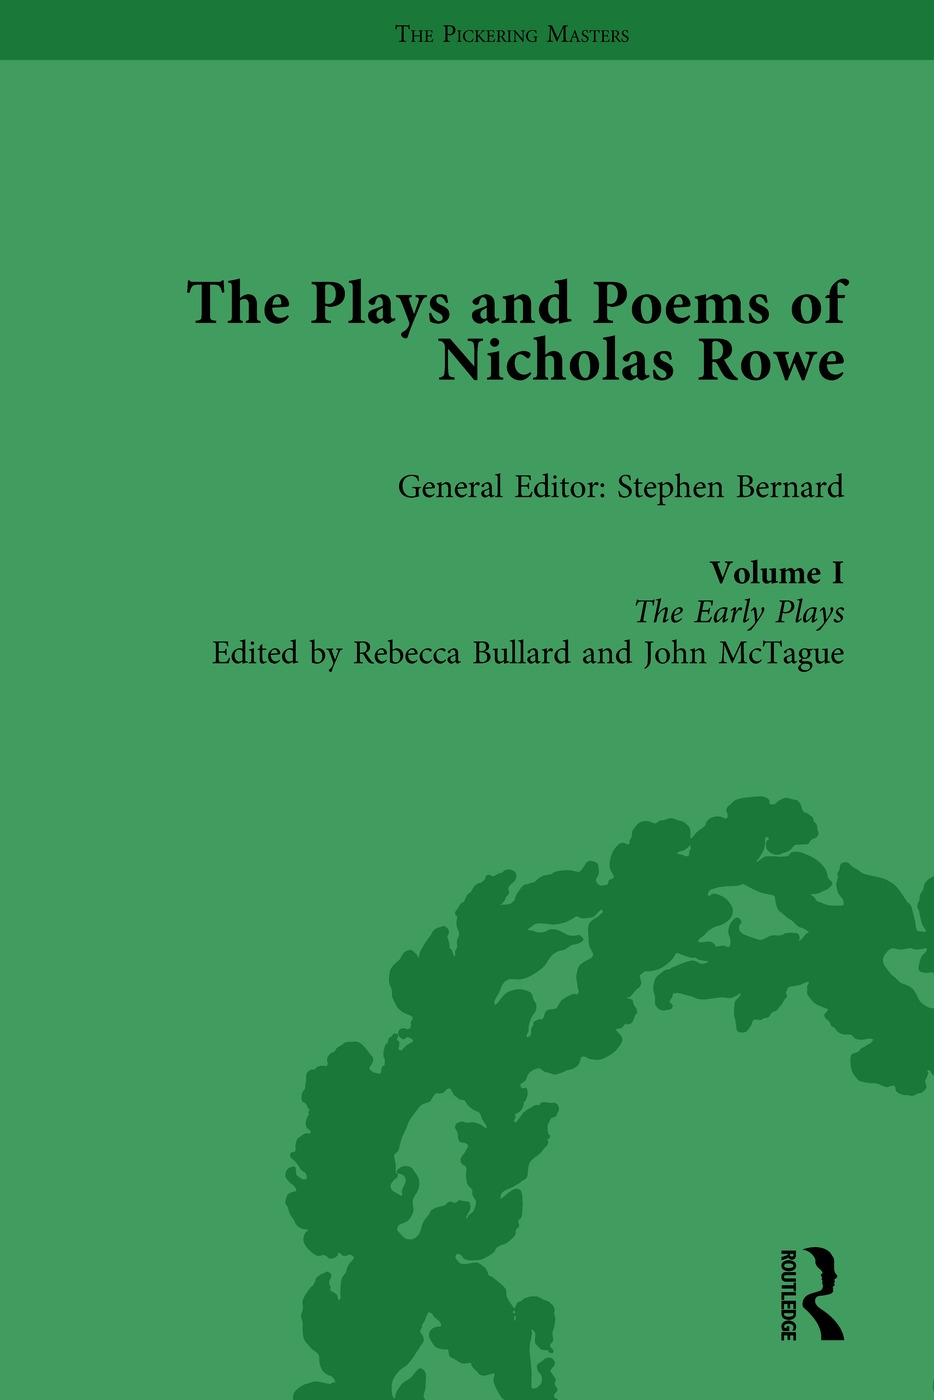 The Plays and Poems of Nicholas Rowe, Volume I: The Early Plays